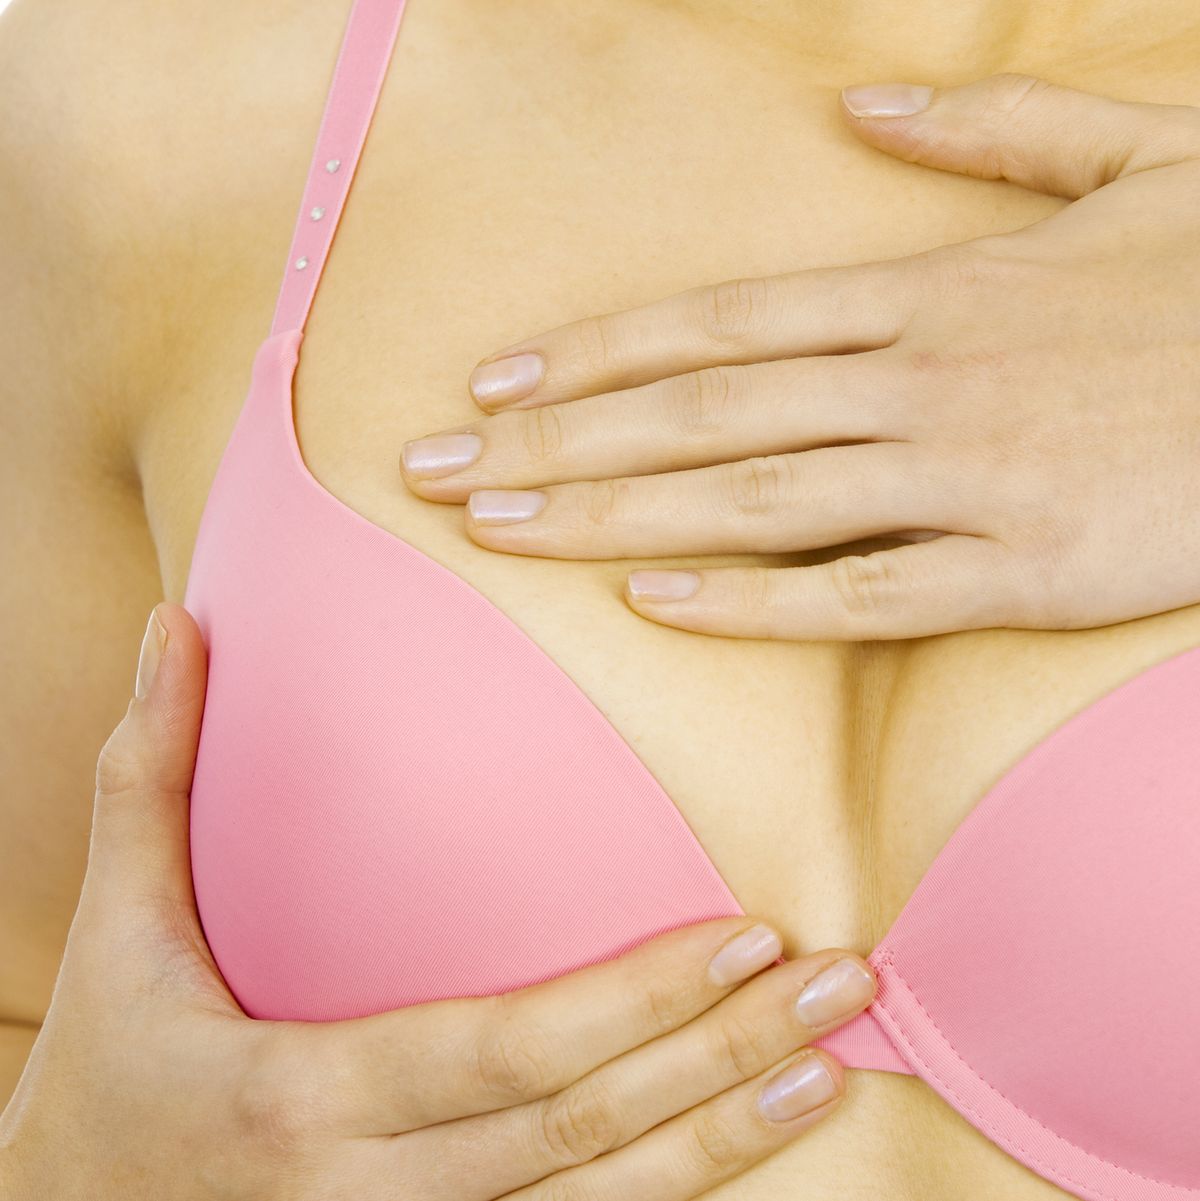 Pain Around Bra Band Area During Breast Cancer Treatment: What Causes It?